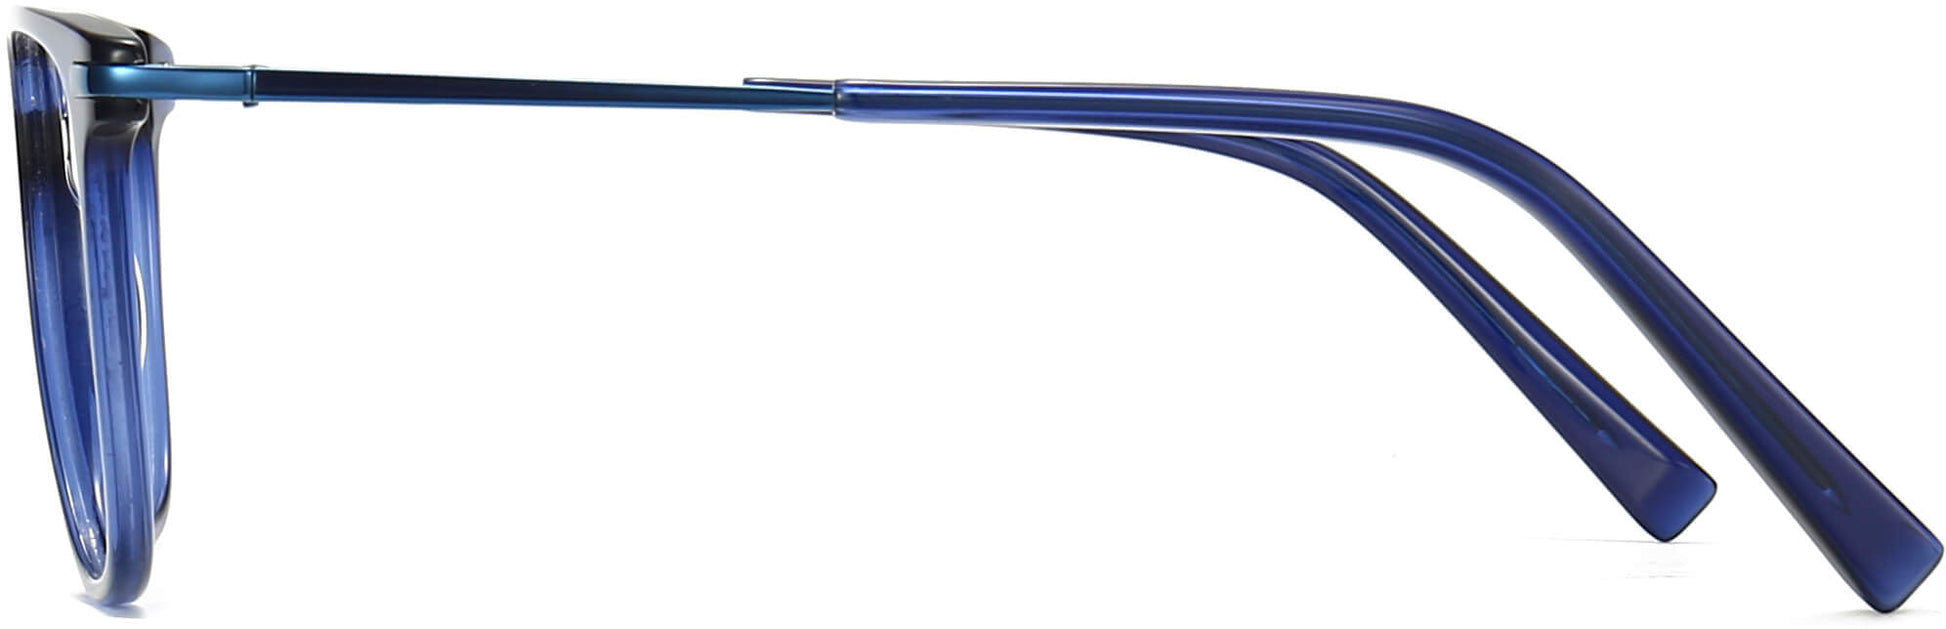 Ahmad Round Blue Eyeglasses from ANRRI, side view